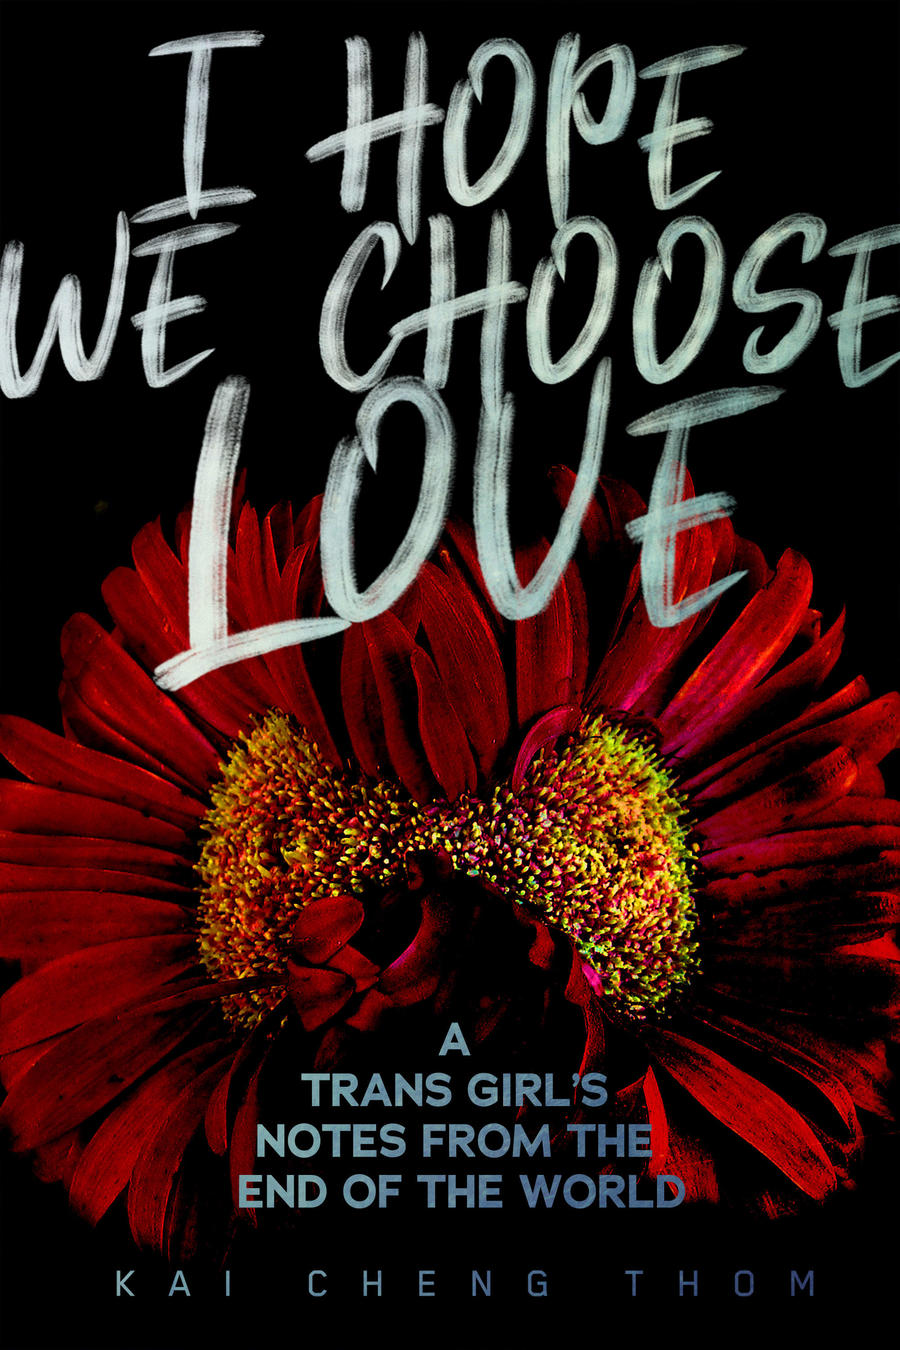 Book cover reading "I hope we choose love a trans girl's notes from the end of the world Kai Cheng Thom" and depicting two flowers